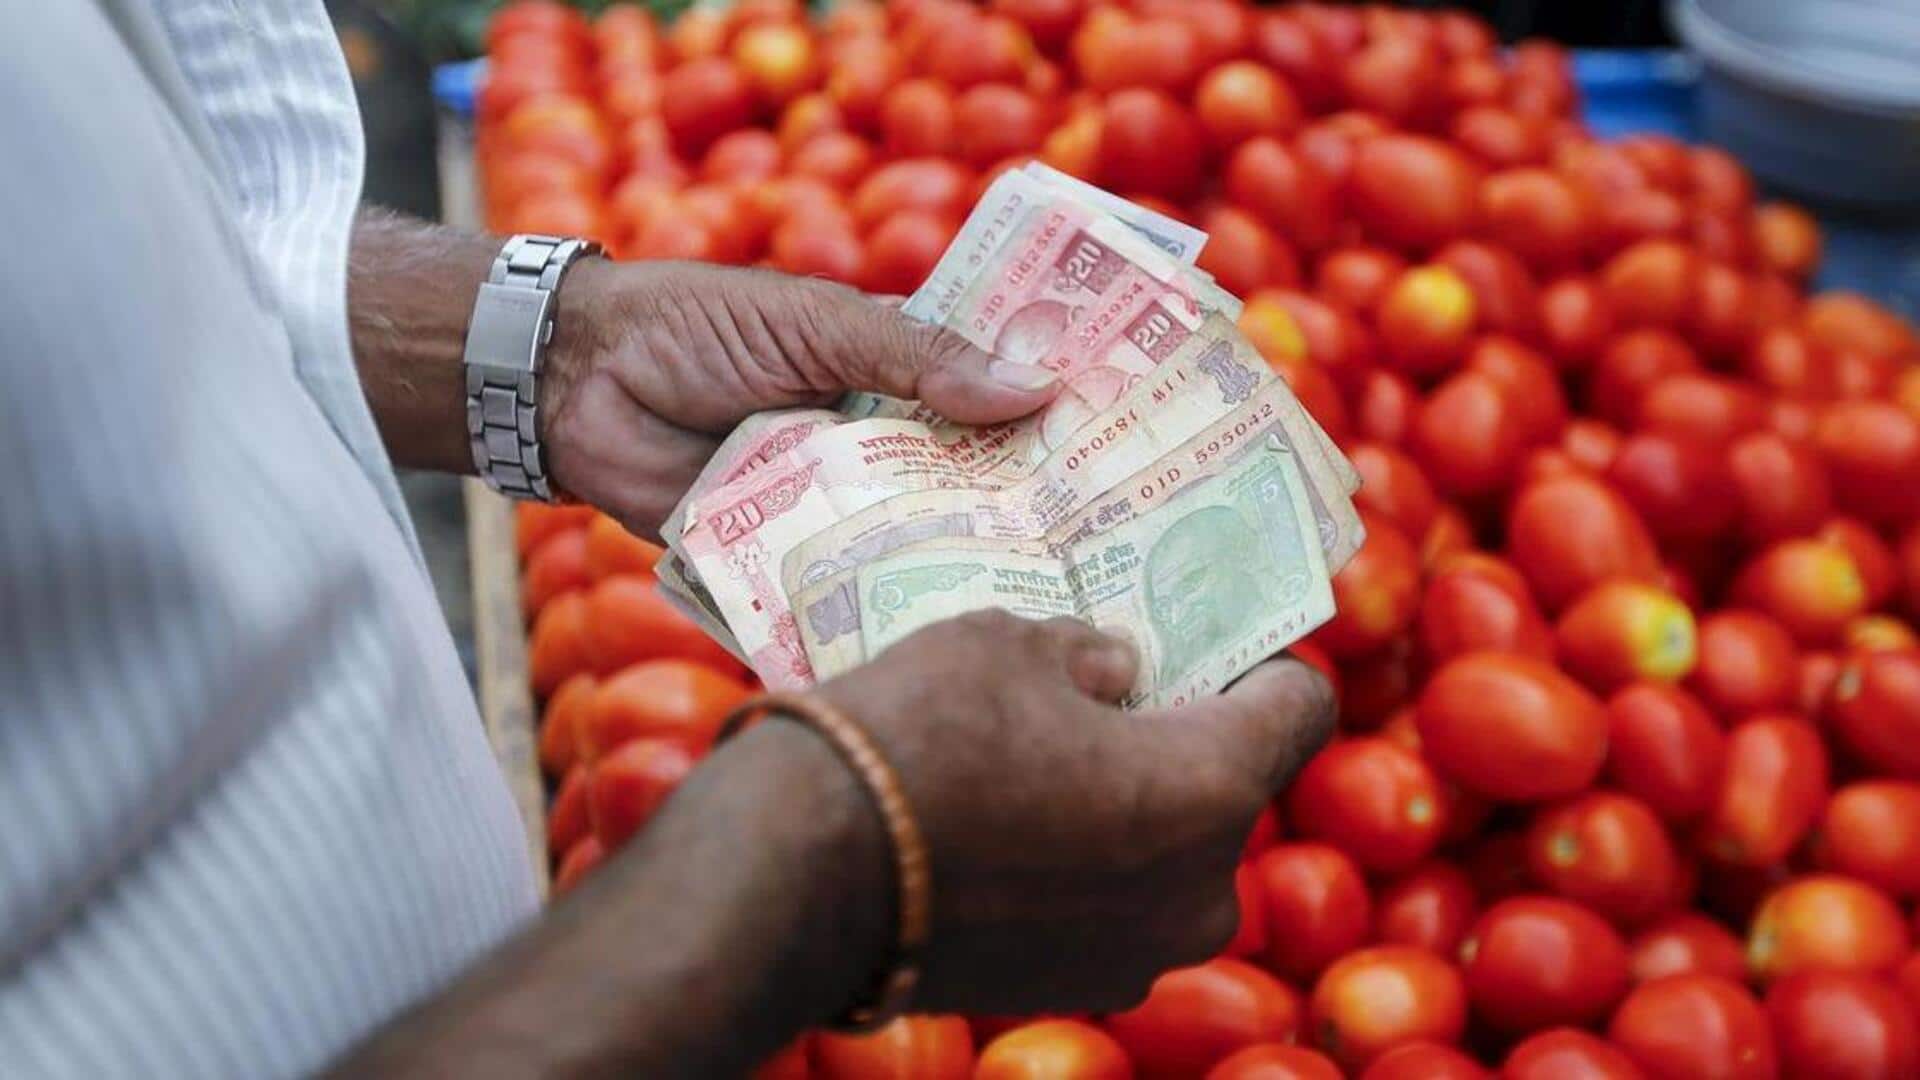 India's retail inflation eases to 5.1%, industrial production at 3.8%